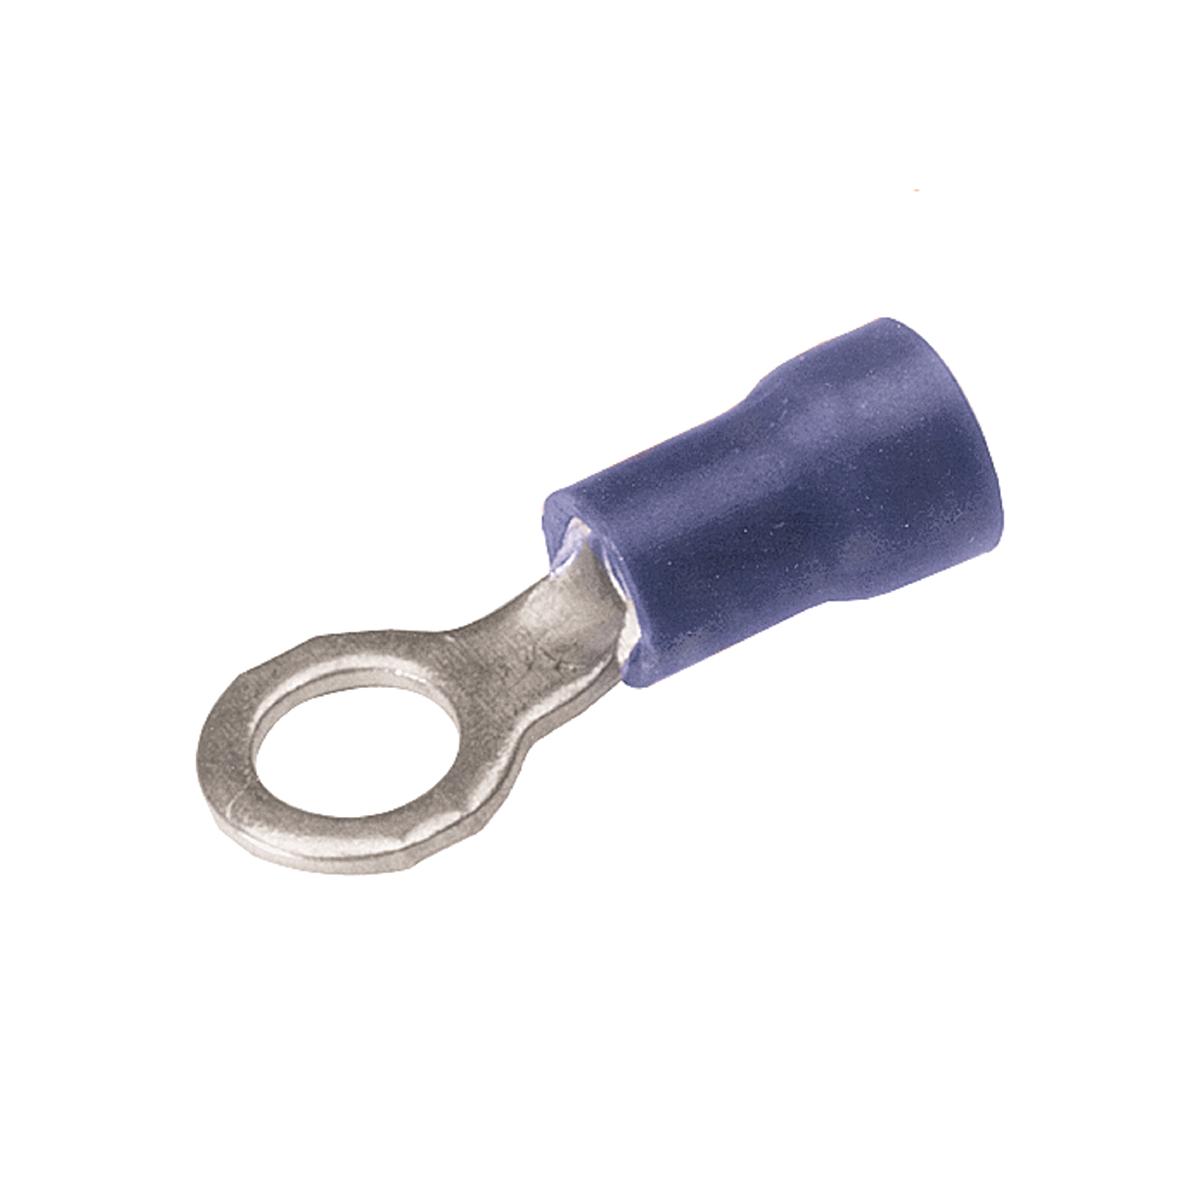 Hubbell BA14E38 Vinyl Ring Terminal For 16 - 14 AWG.  ; Expanded insulation support accepts standard and large wire diameters providing lower inventory requirements and greater flexibility ; Funnel entry for easy wire insertion ; Manufactured of pure electrolytic copper 